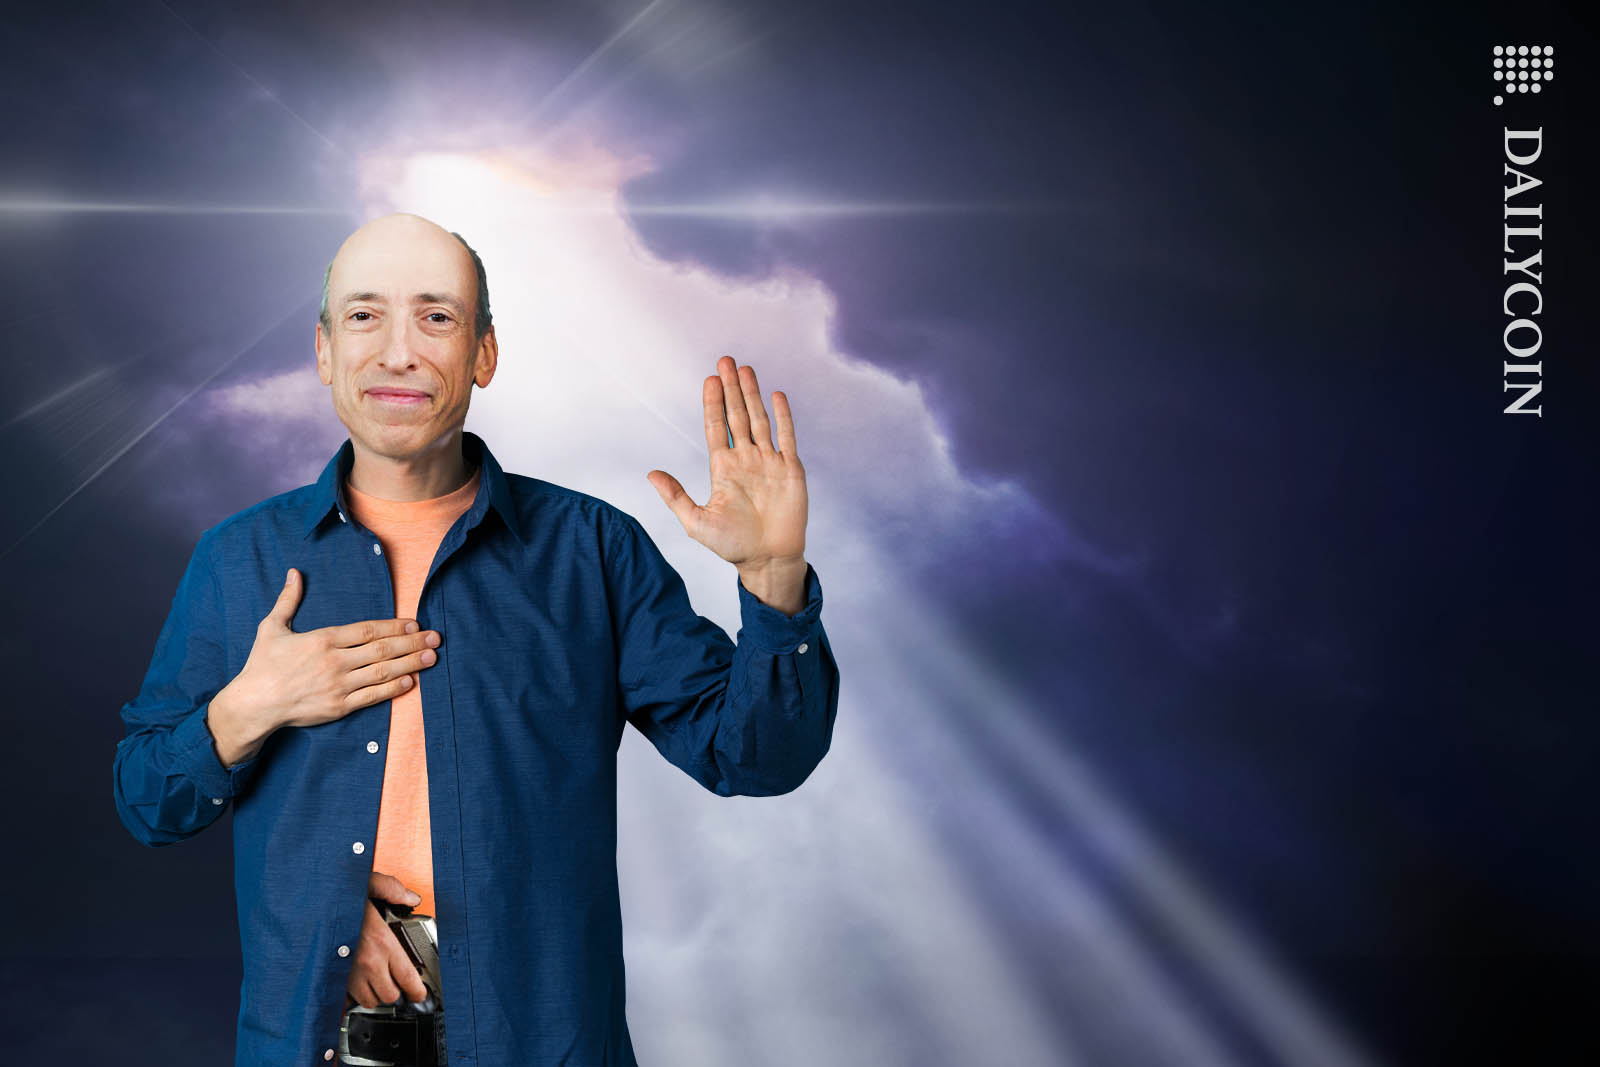 Gary Gensler with one hand raised and one on his heart, in angelic light.